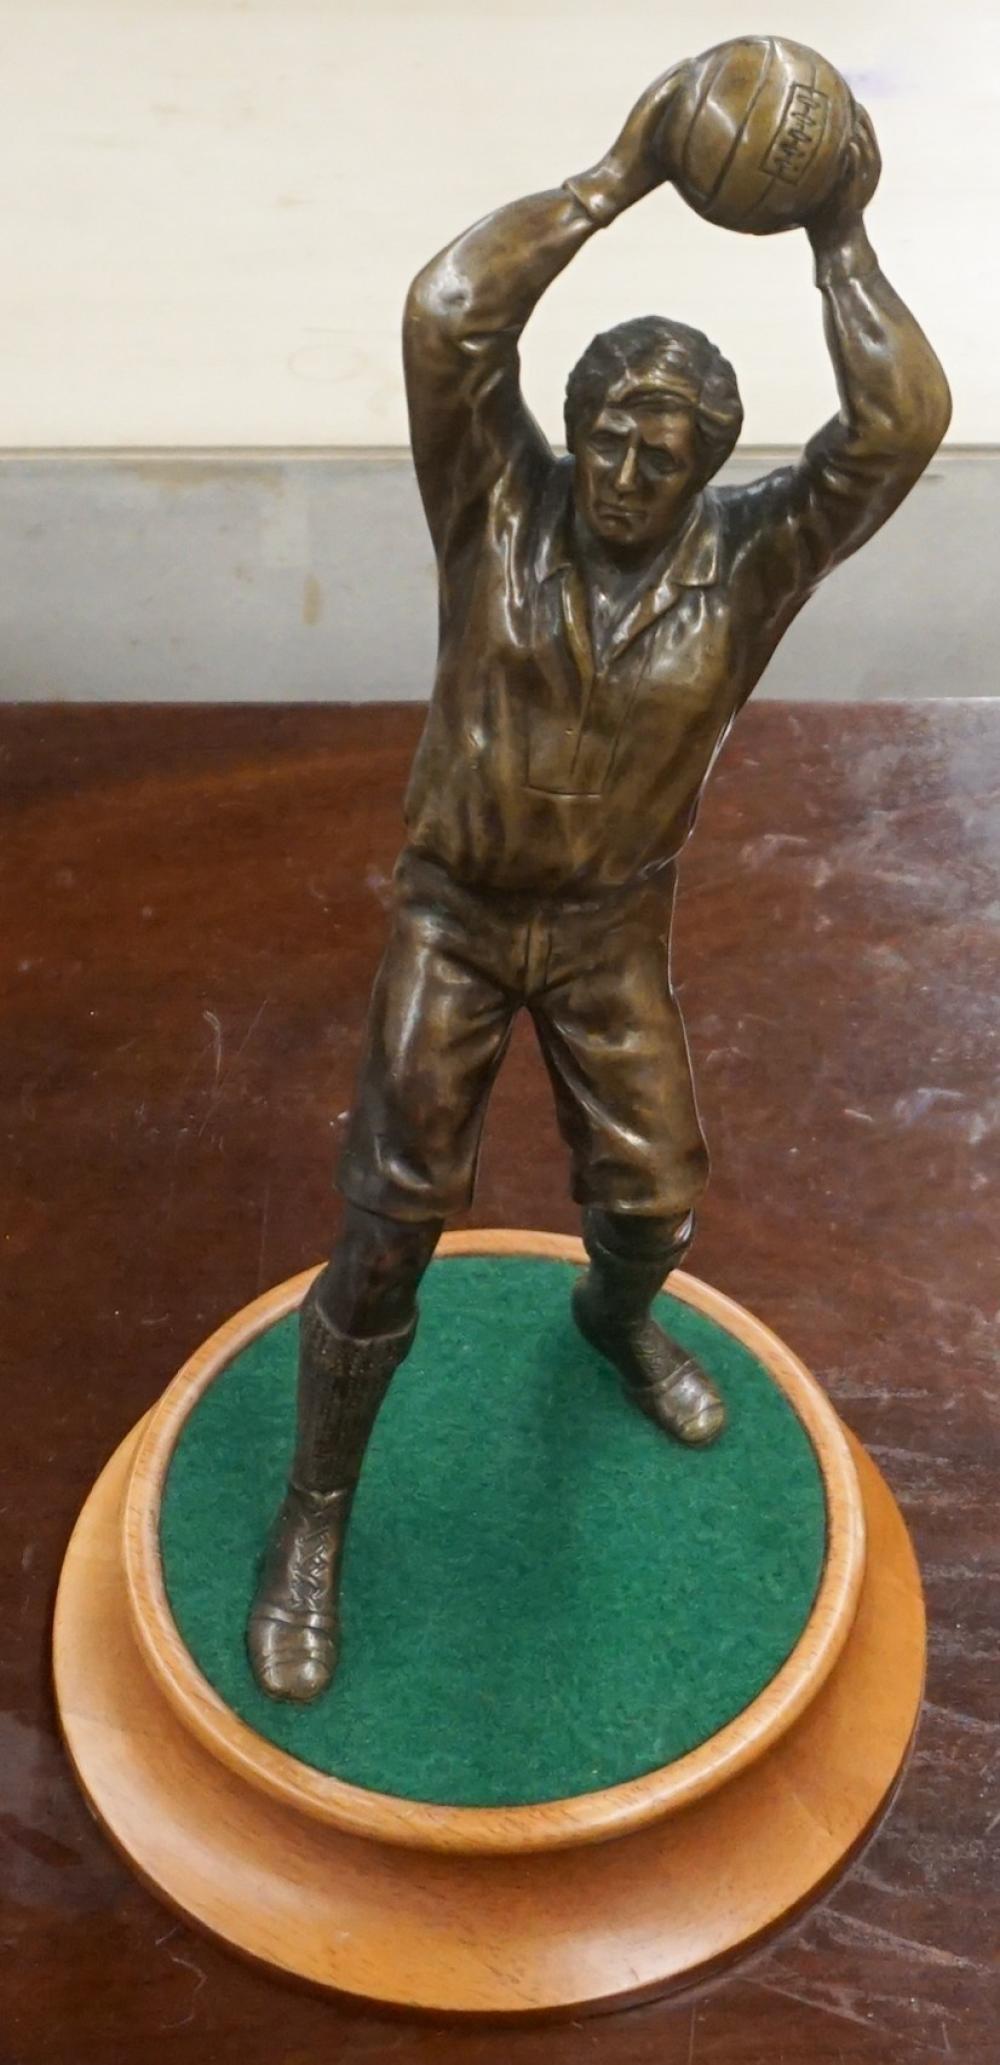 BRONZE FIGURE OF RUGBY PLAYER  2e45b3